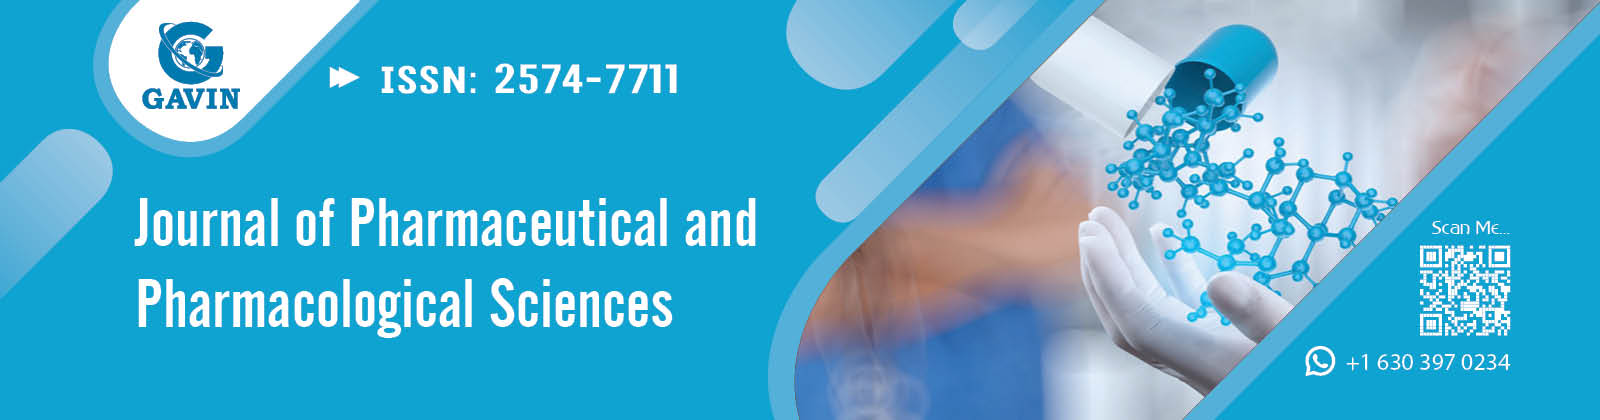 Journal of Pharmaceutical and Pharmacological Sciences